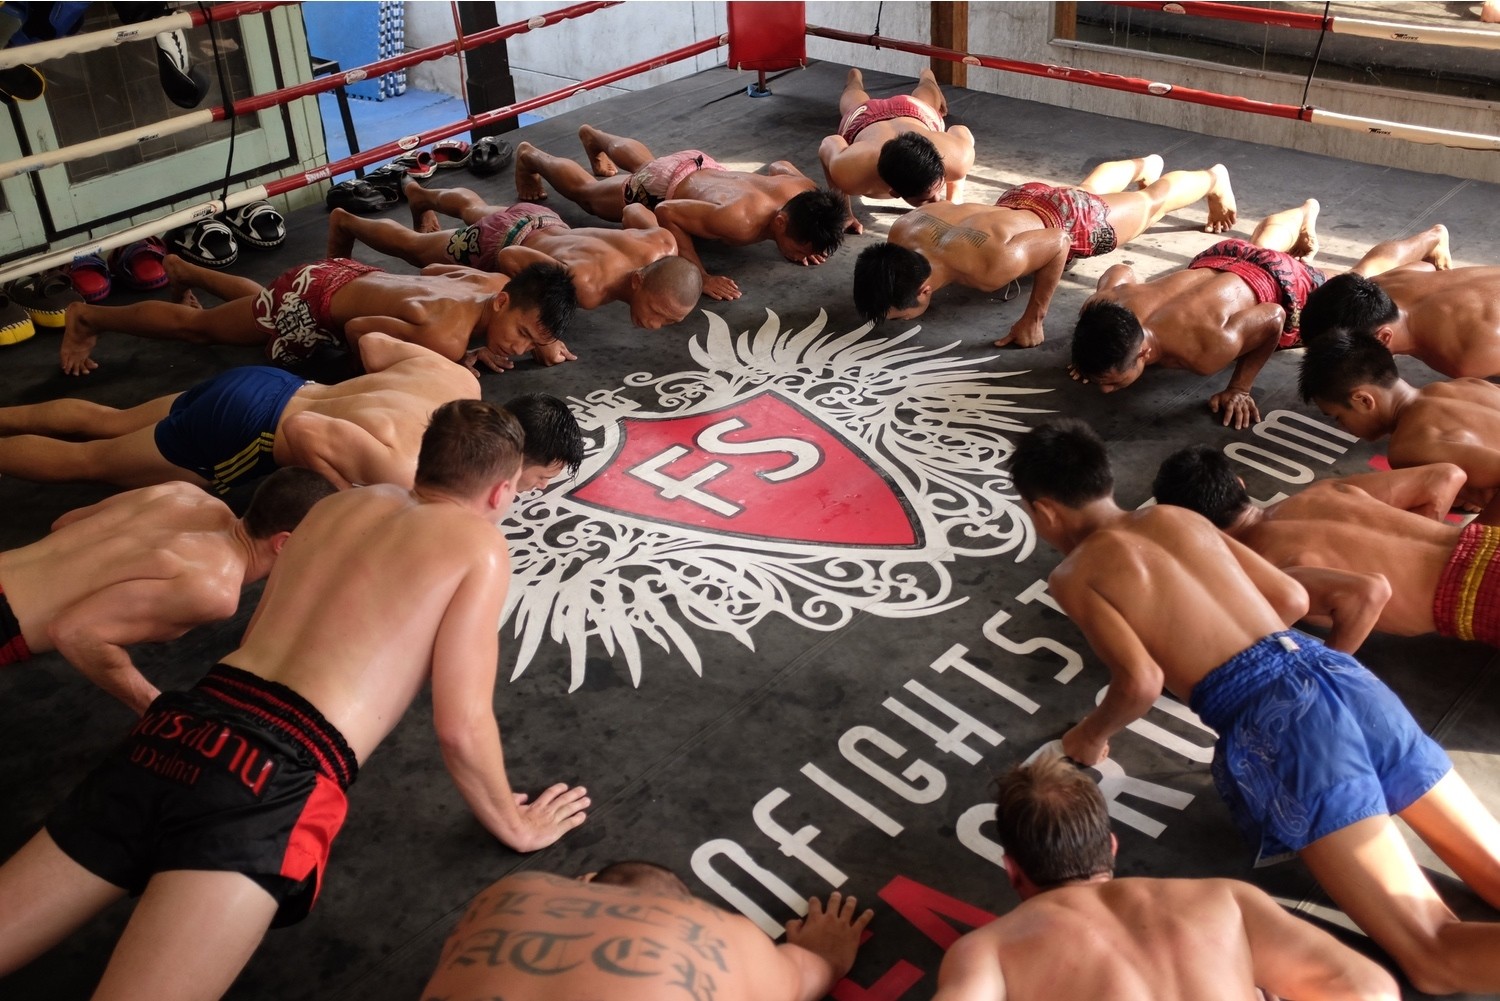 Dominate the Muay Thai Clinch with Petchboonchu 